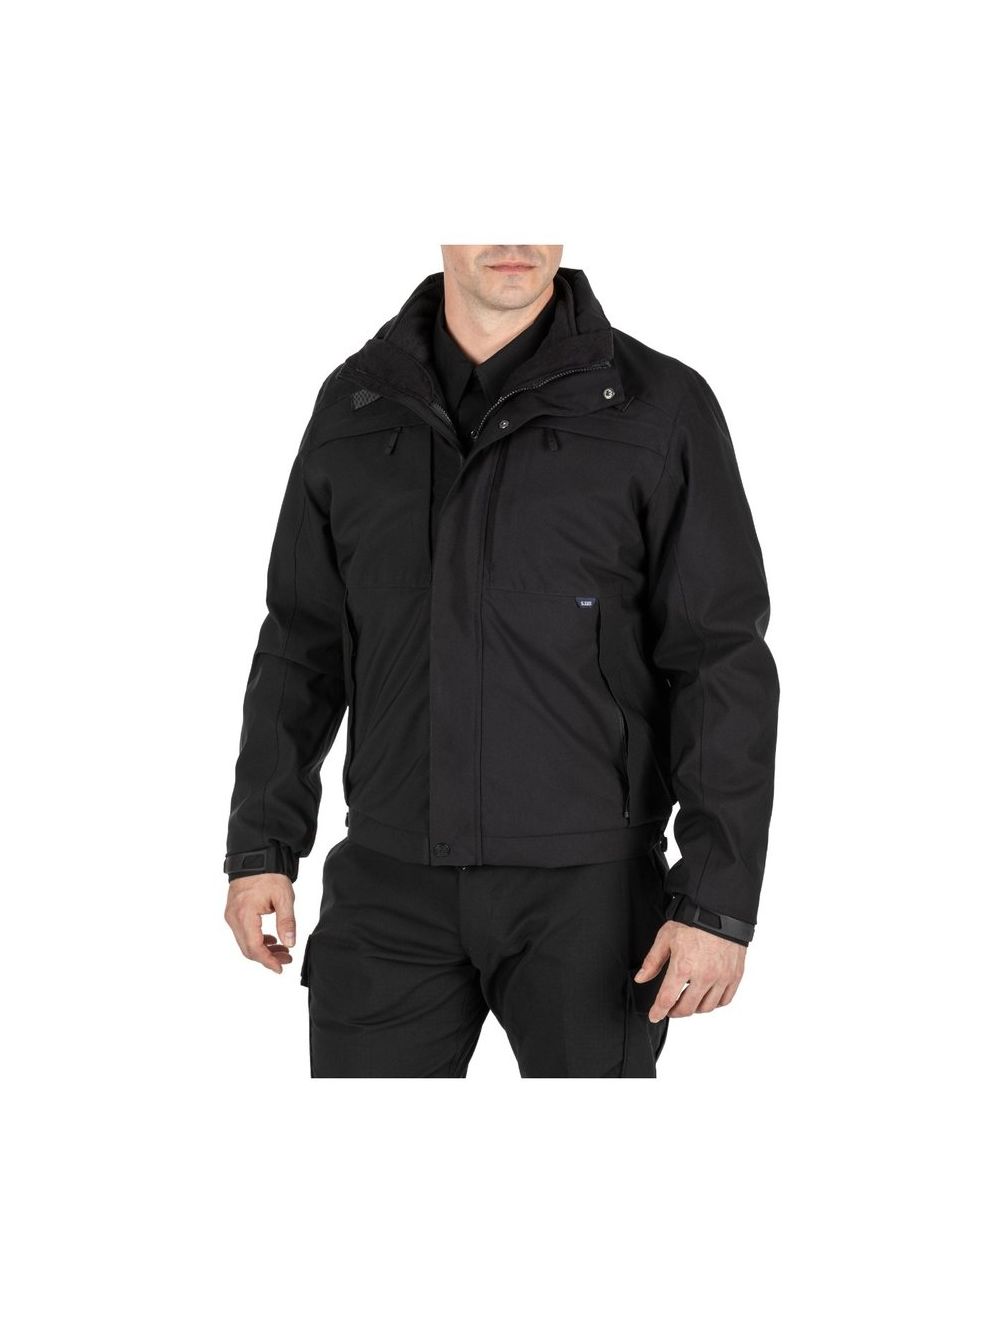 5-IN-1 Jacket 2.0 By 5.11 Tactical S-4XL / Black